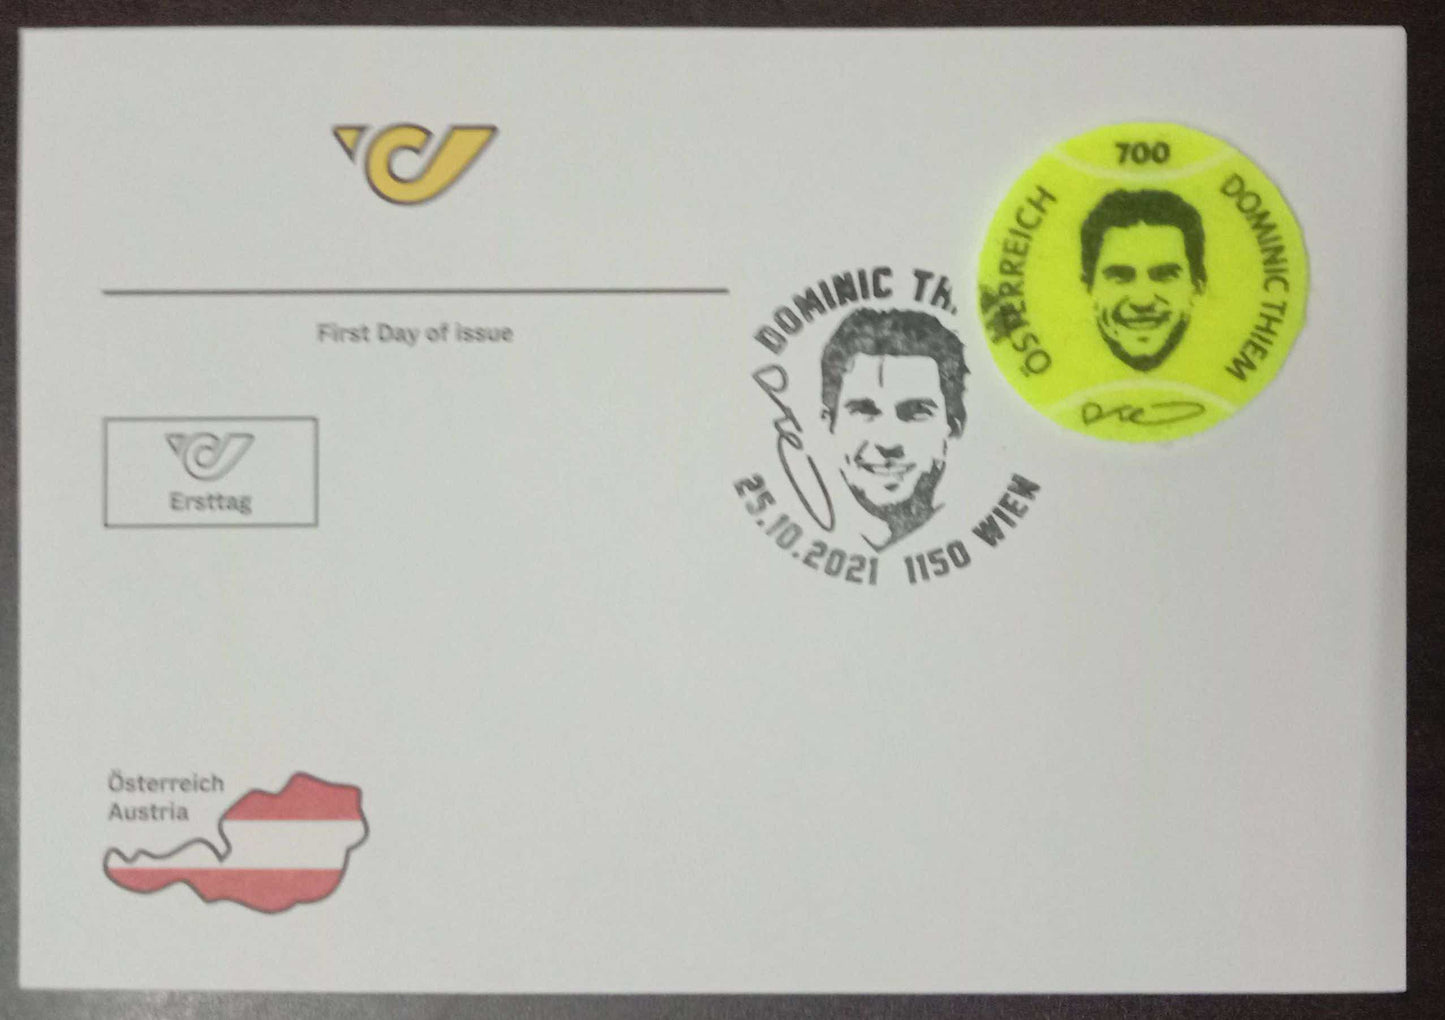 Austria Tennis Ball shaped stamp FDC.-Made from tennis ball material.